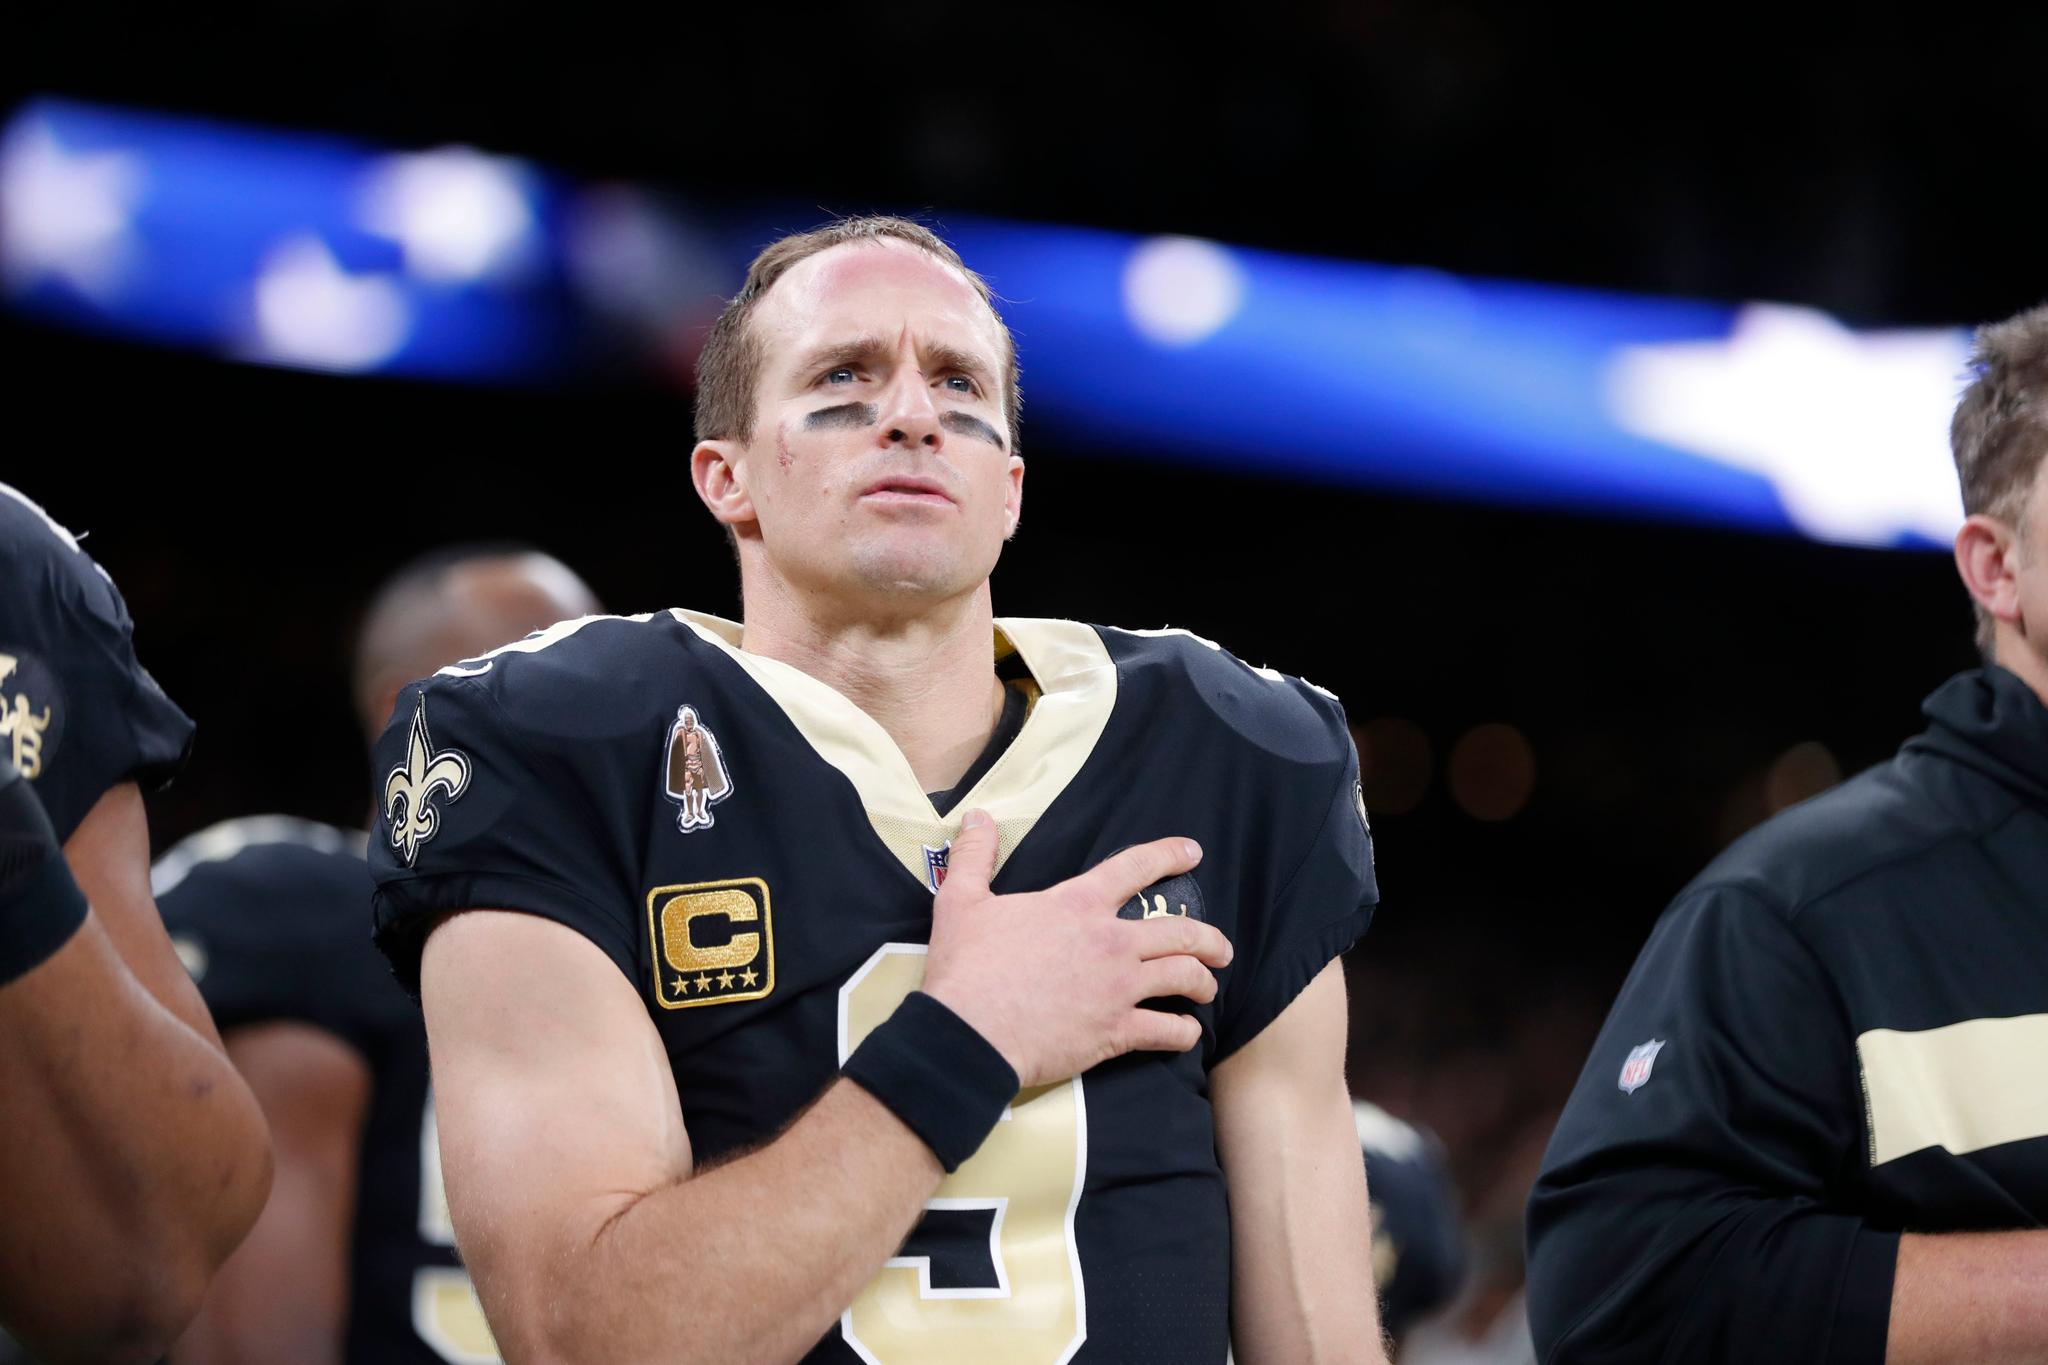 Drew Brees says he will always stand for the anthem